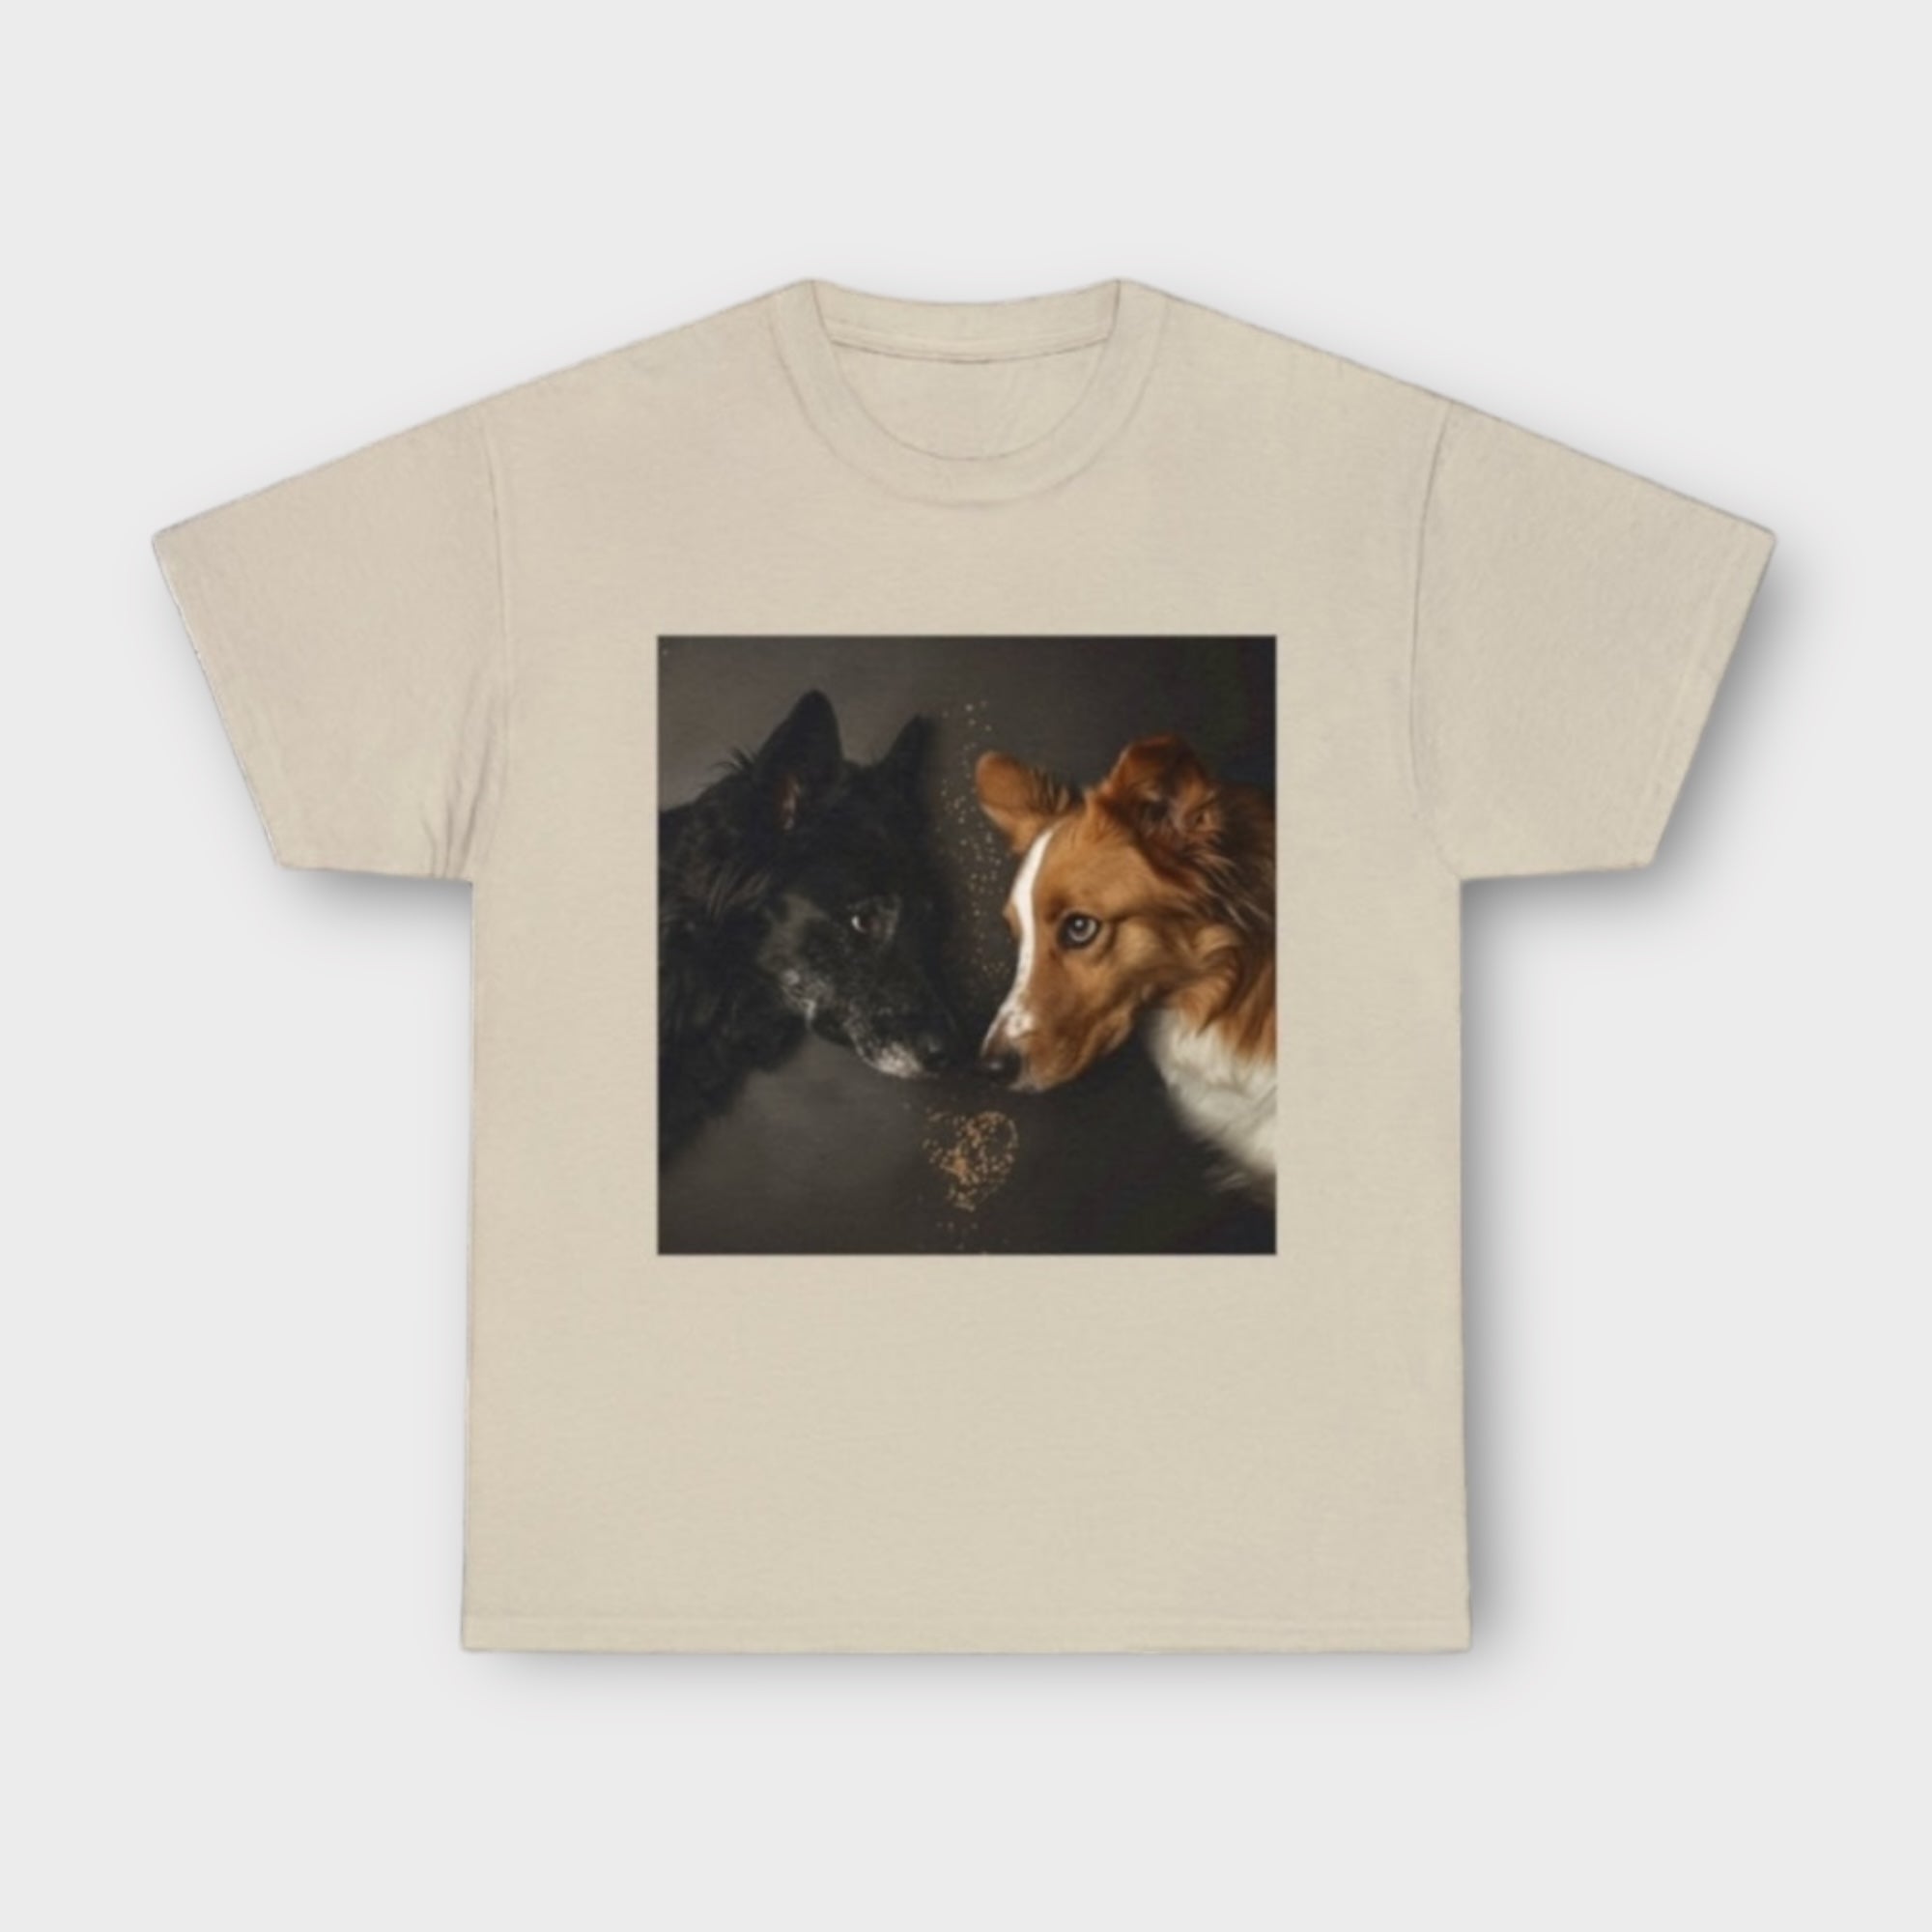 'FYUY' T-shirt two dogs looking at each other